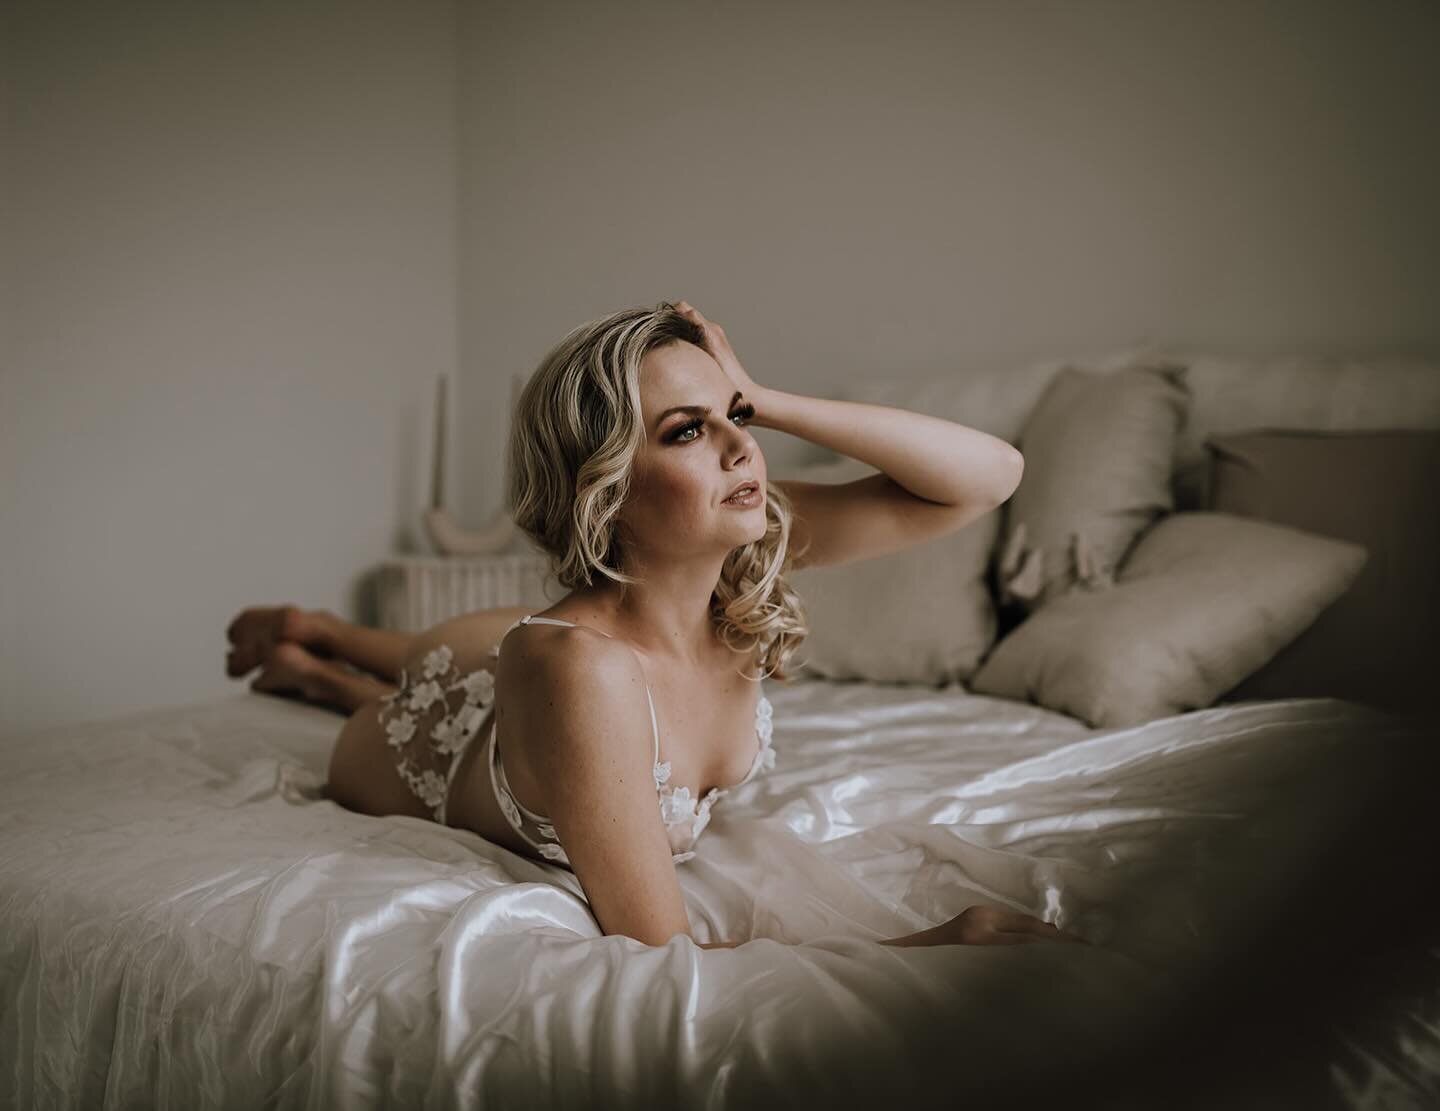 Elevate your Valentine&rsquo;s Day boudoir experience with flawless makeup that captures the essence of love. Secure your session and let&rsquo;s create magic together! 💋📸 #bookmenow #boudoirbeauty #valentinesglam 
.
.
.
💄 @makeupartistrybytrish 
